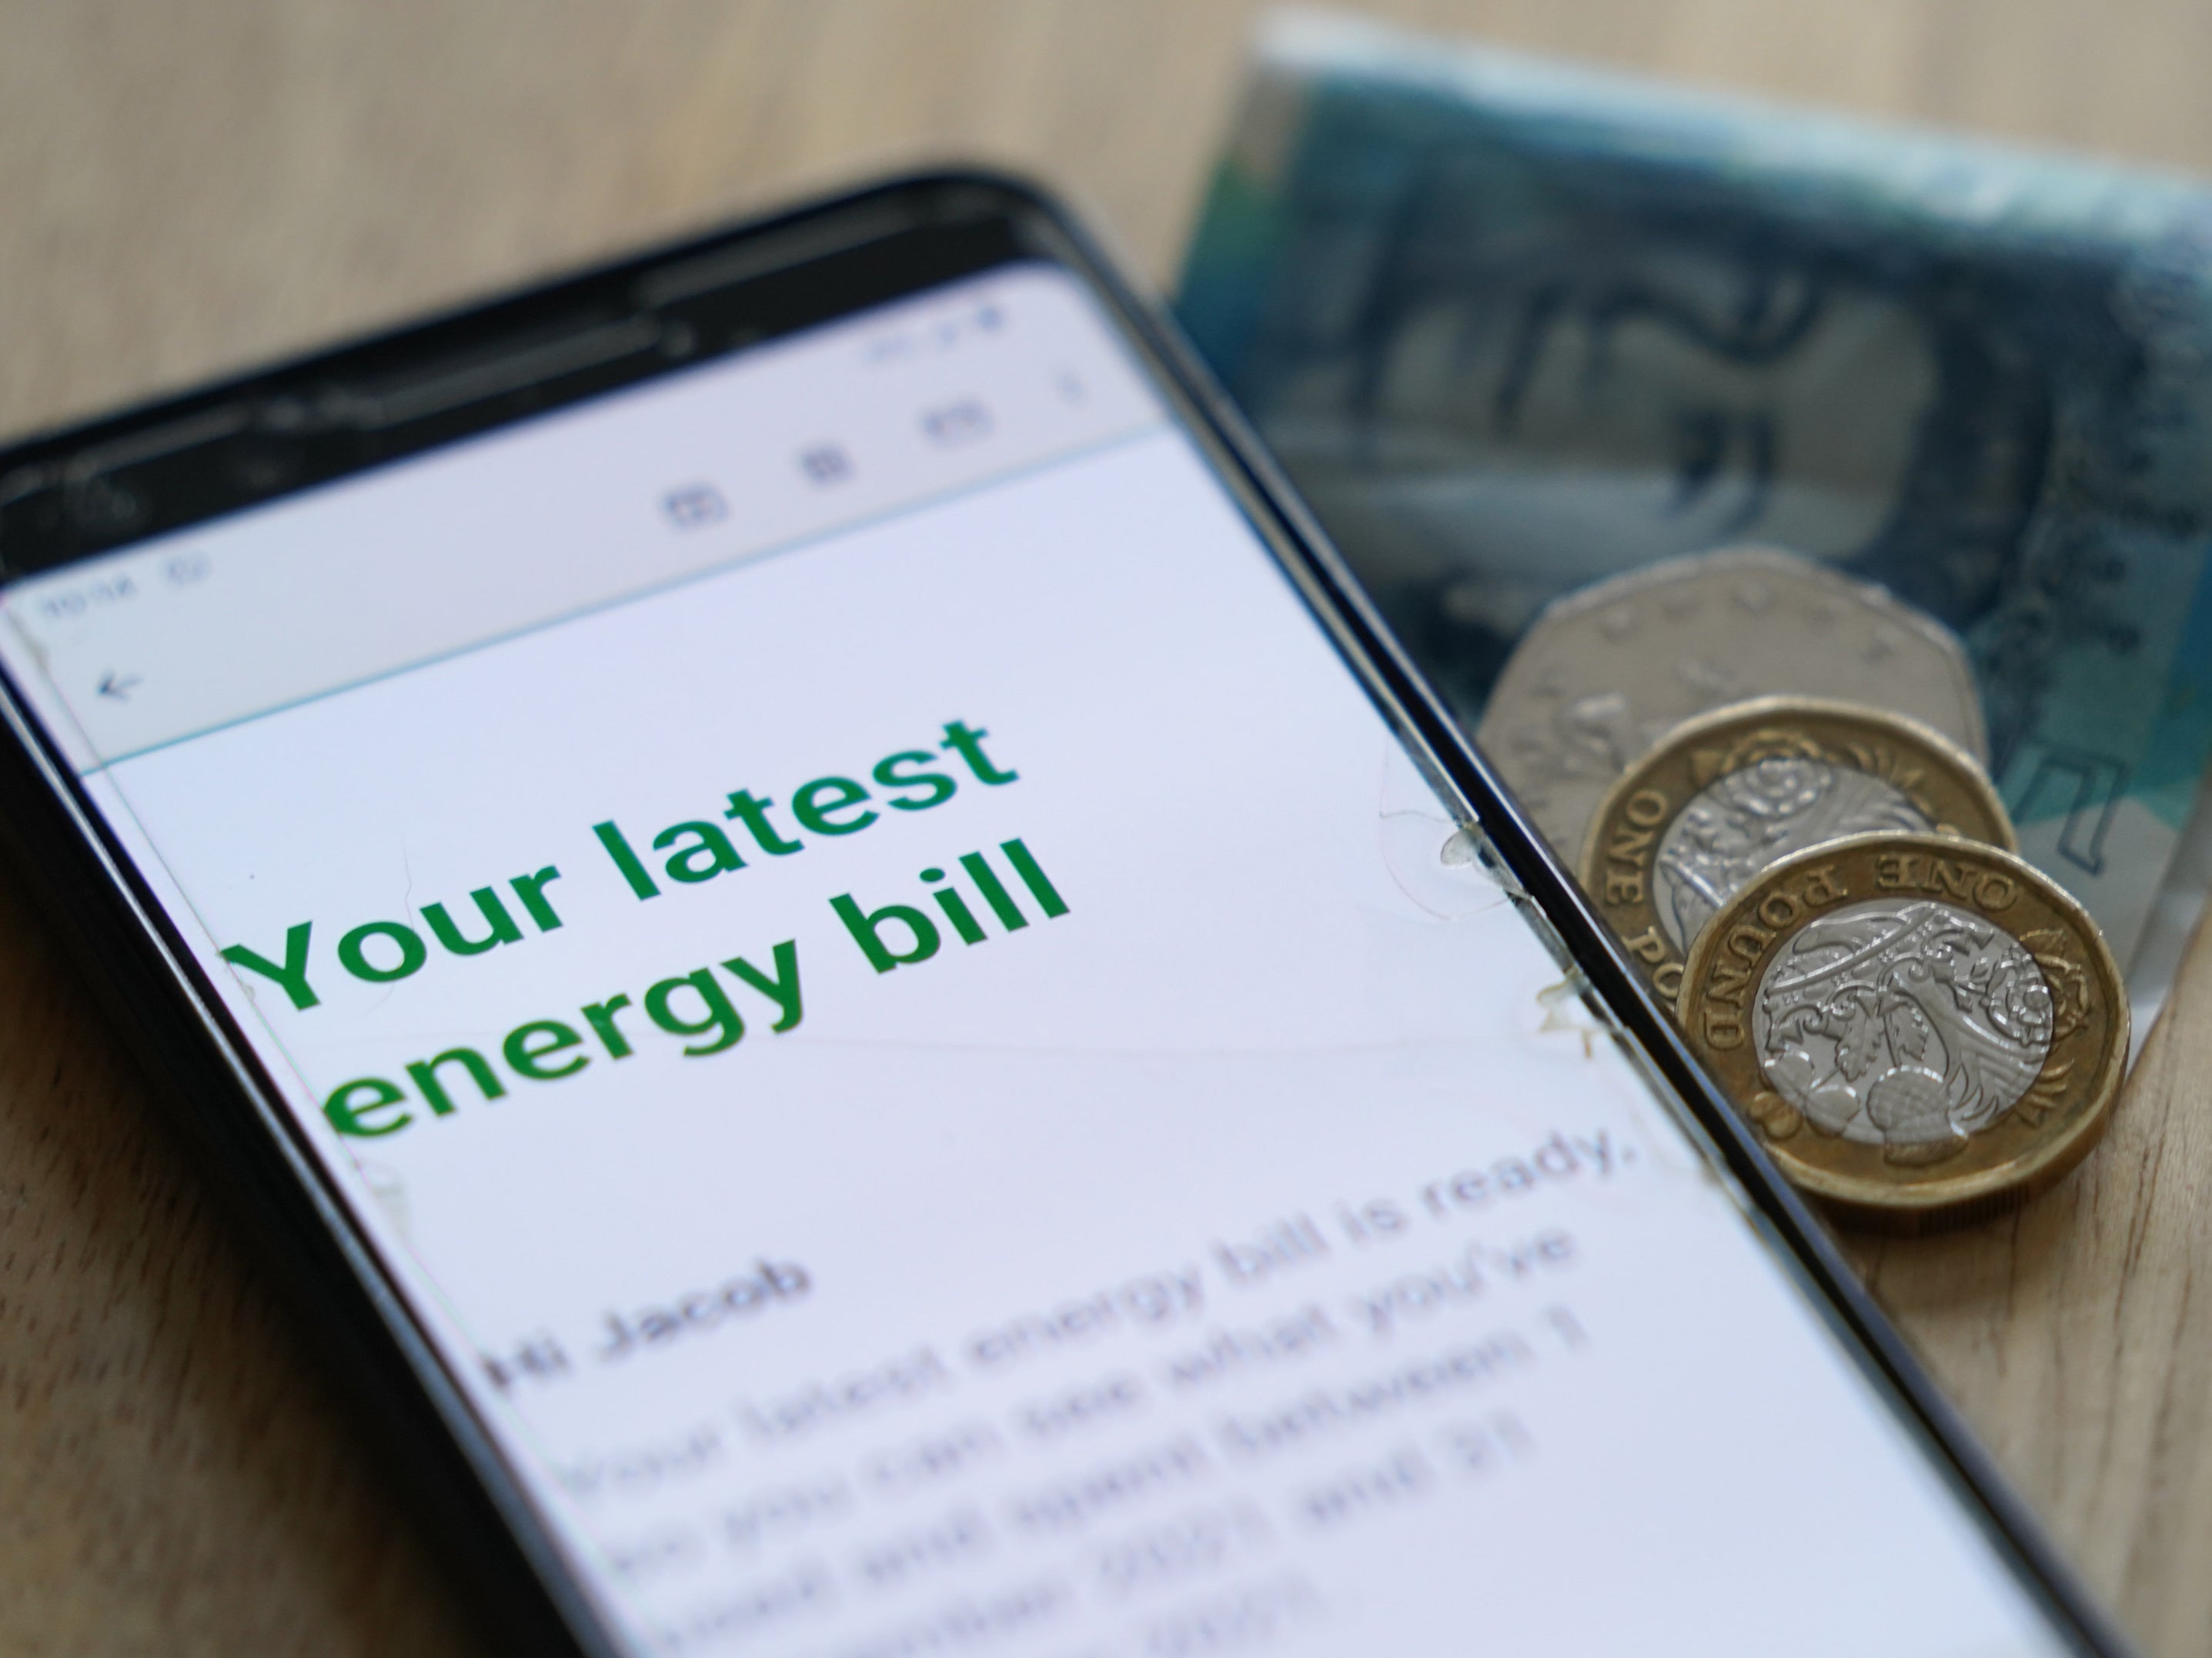 Energy bills are set to soar in October when current price cap lifted